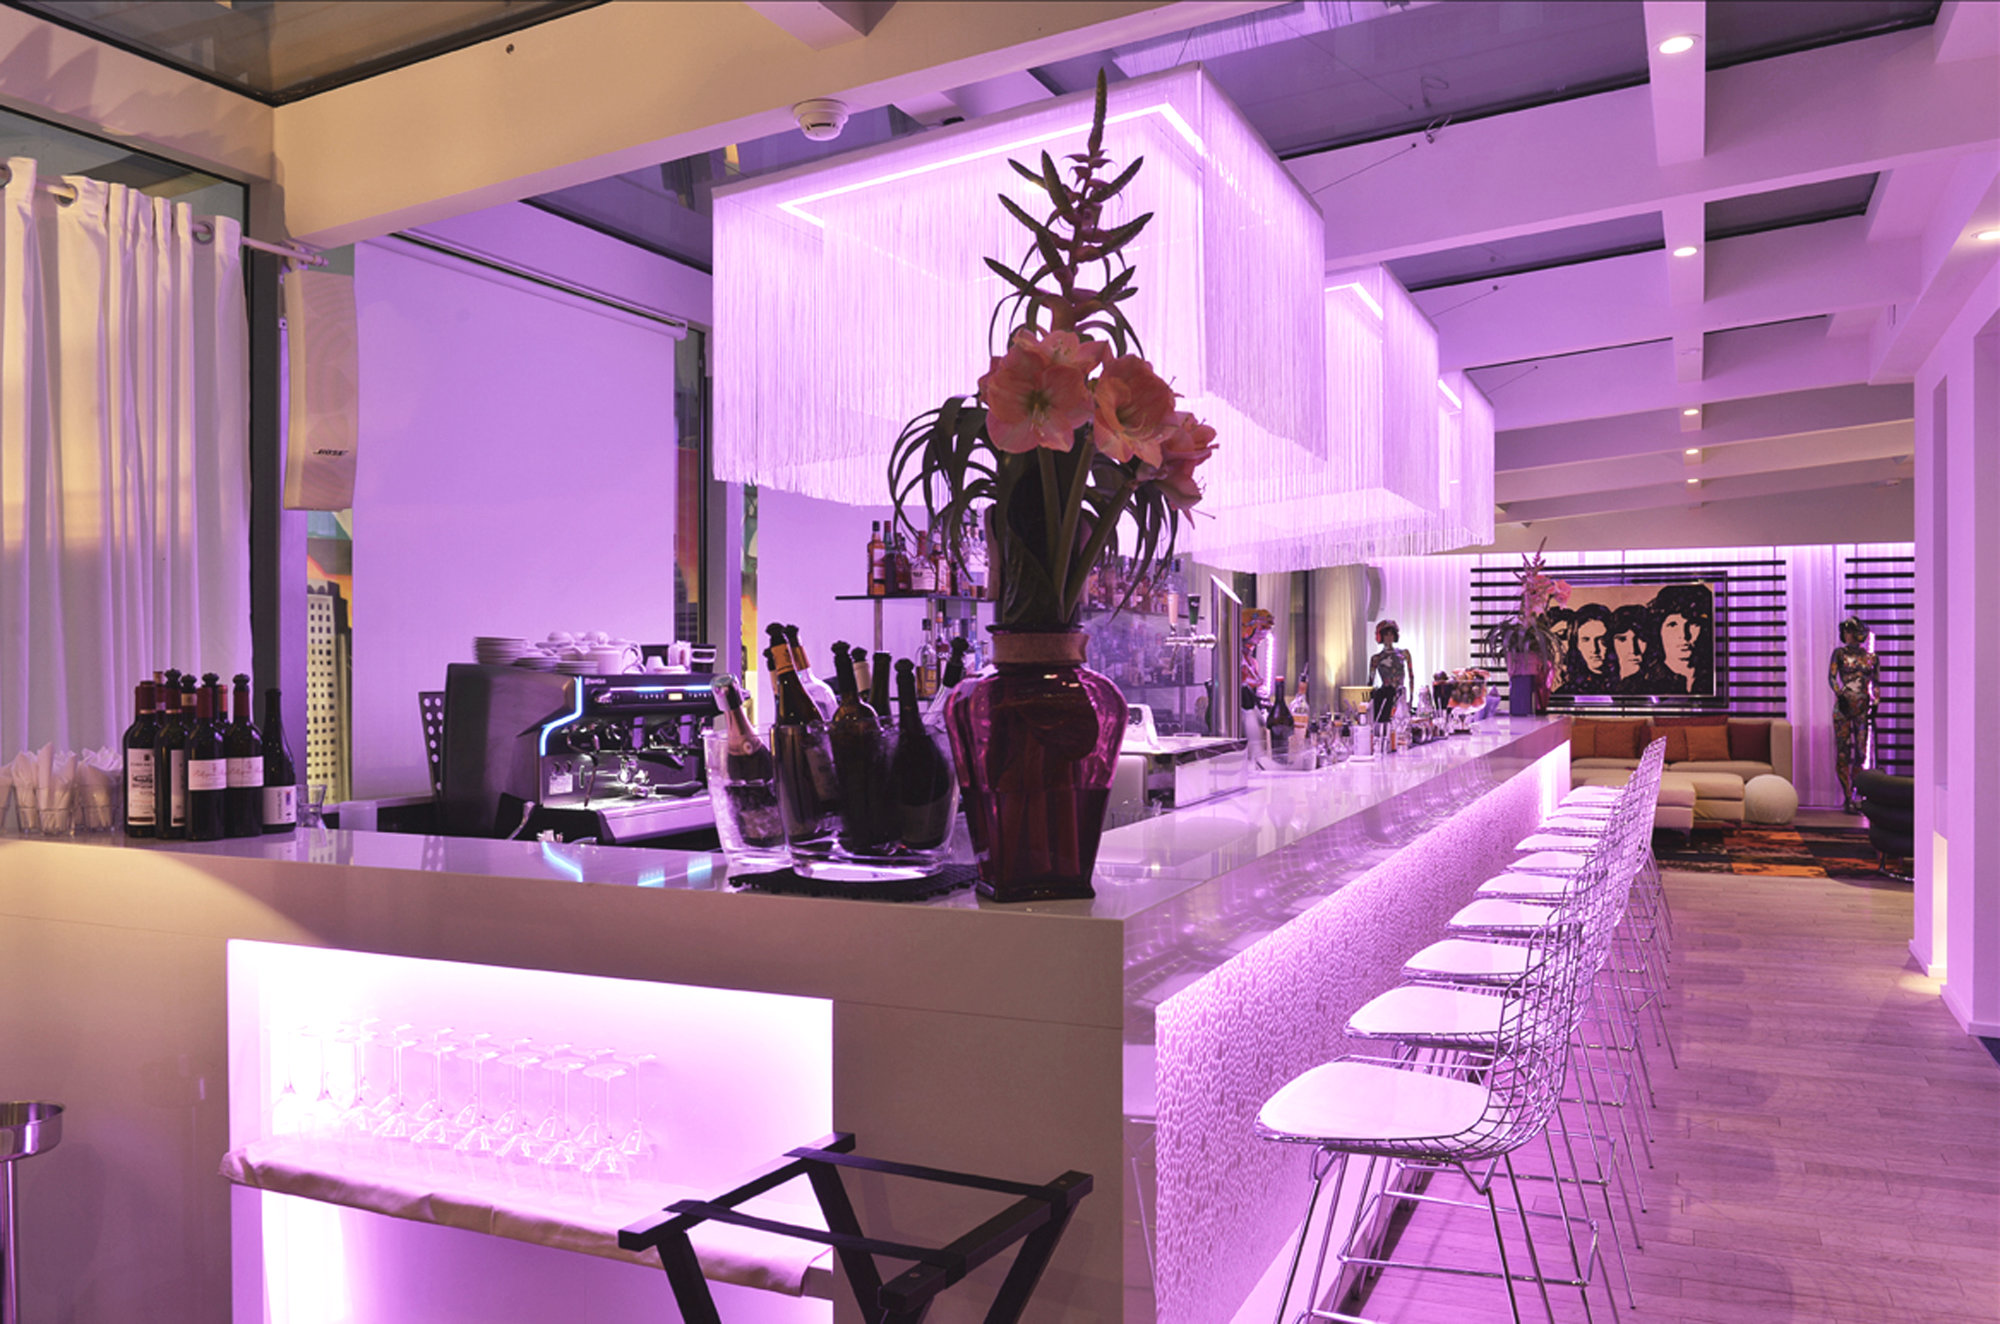 Hotel N'Vy bar counter with fabulous chandeliers pendants. Gitaly contract